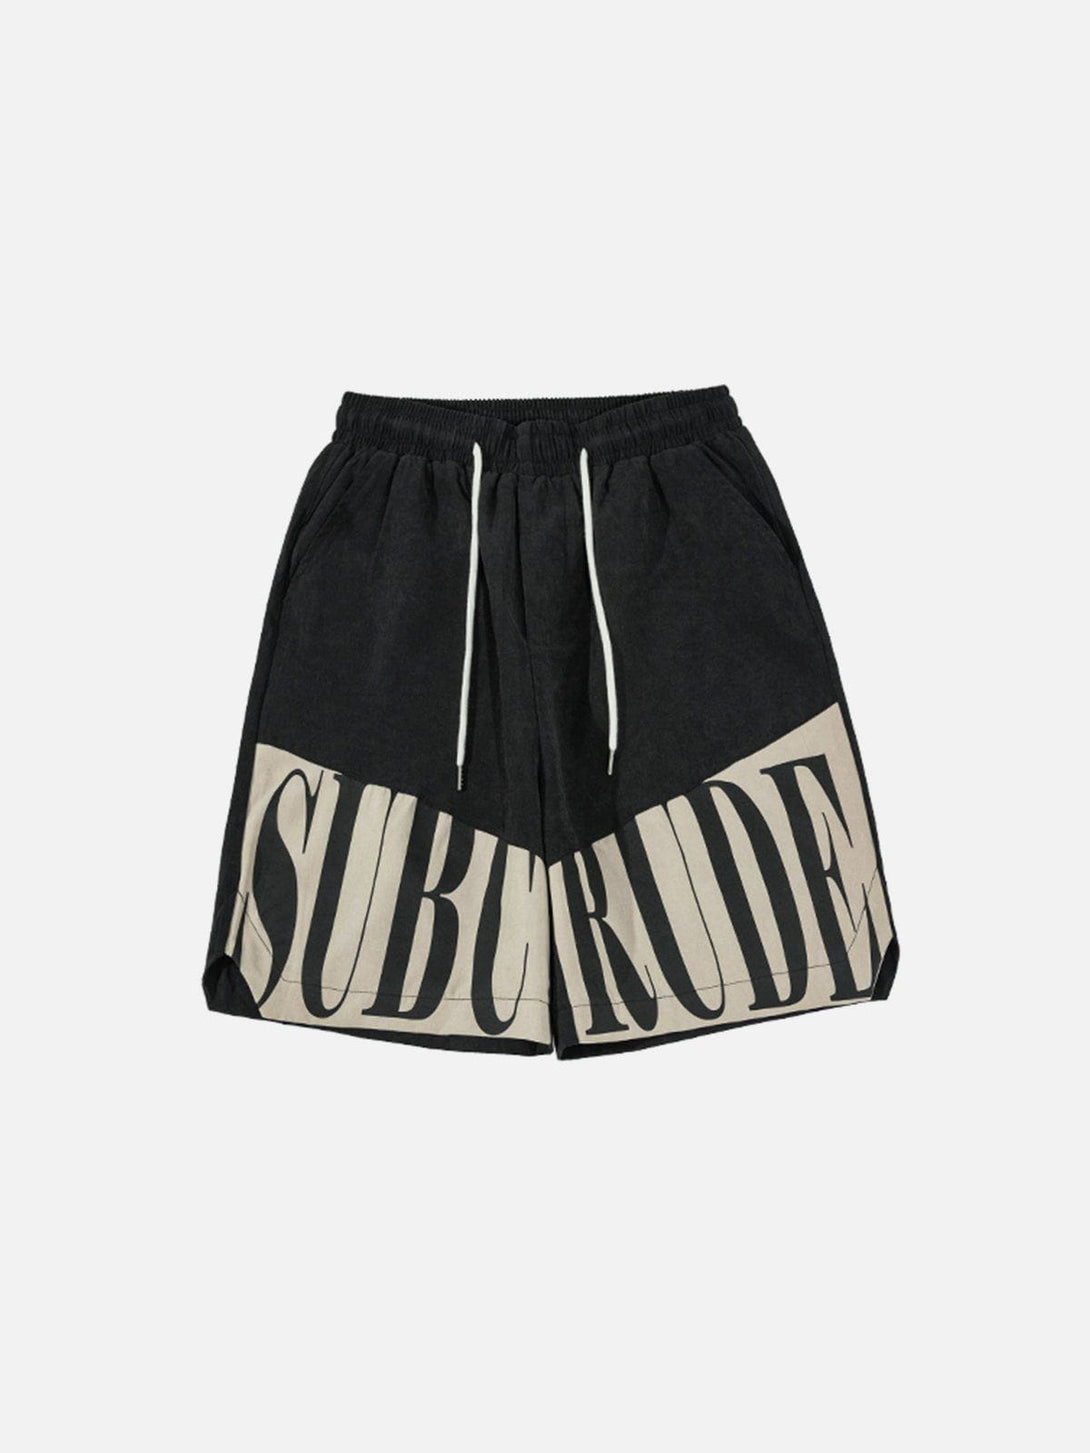 Majesda® - Letters Patchwork Shorts outfit ideas streetwear fashion